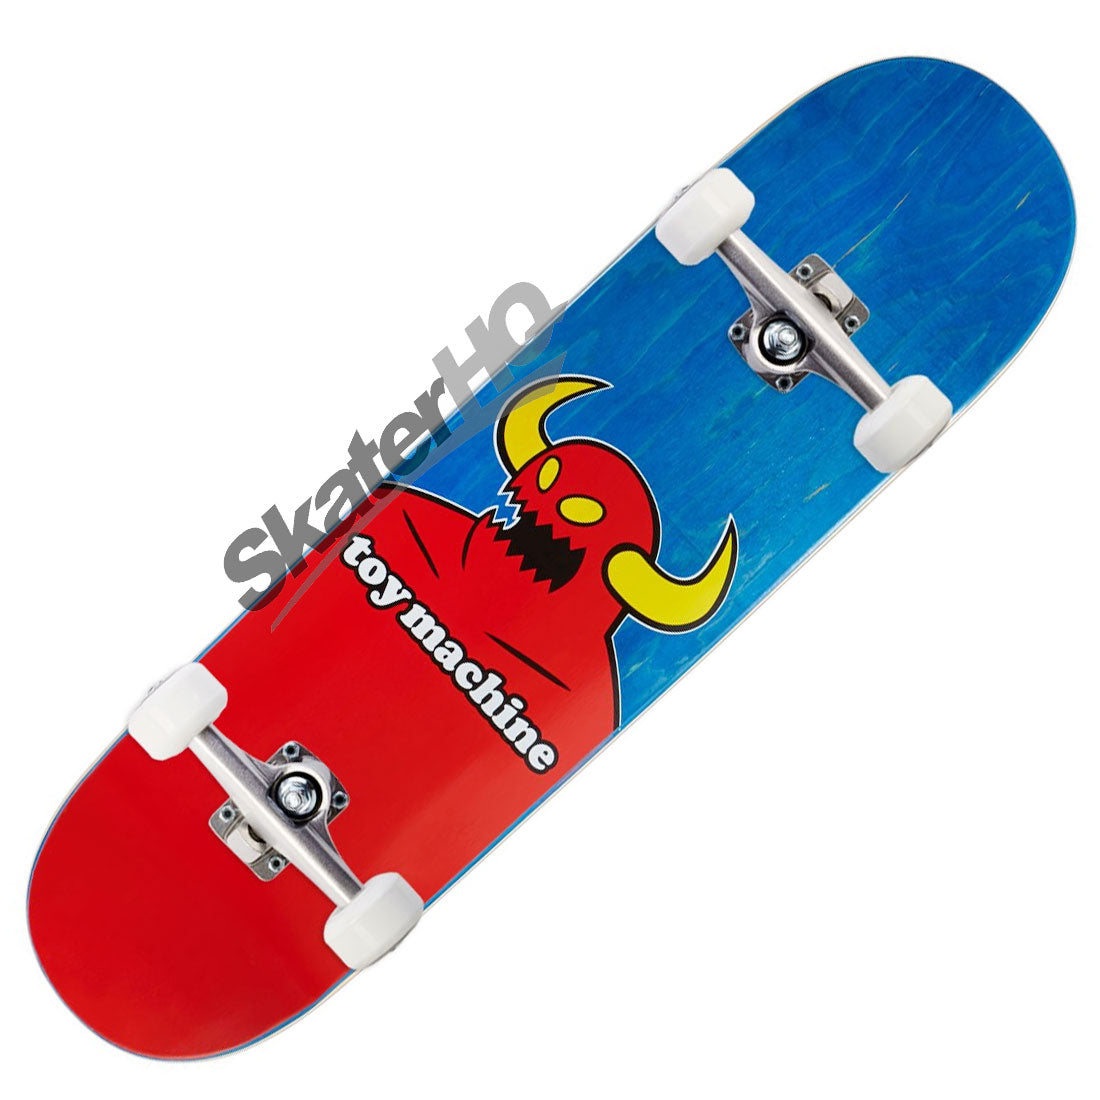 Toy Machine Monster 8.0 Complete - Blue Stain Skateboard Completes Modern Street